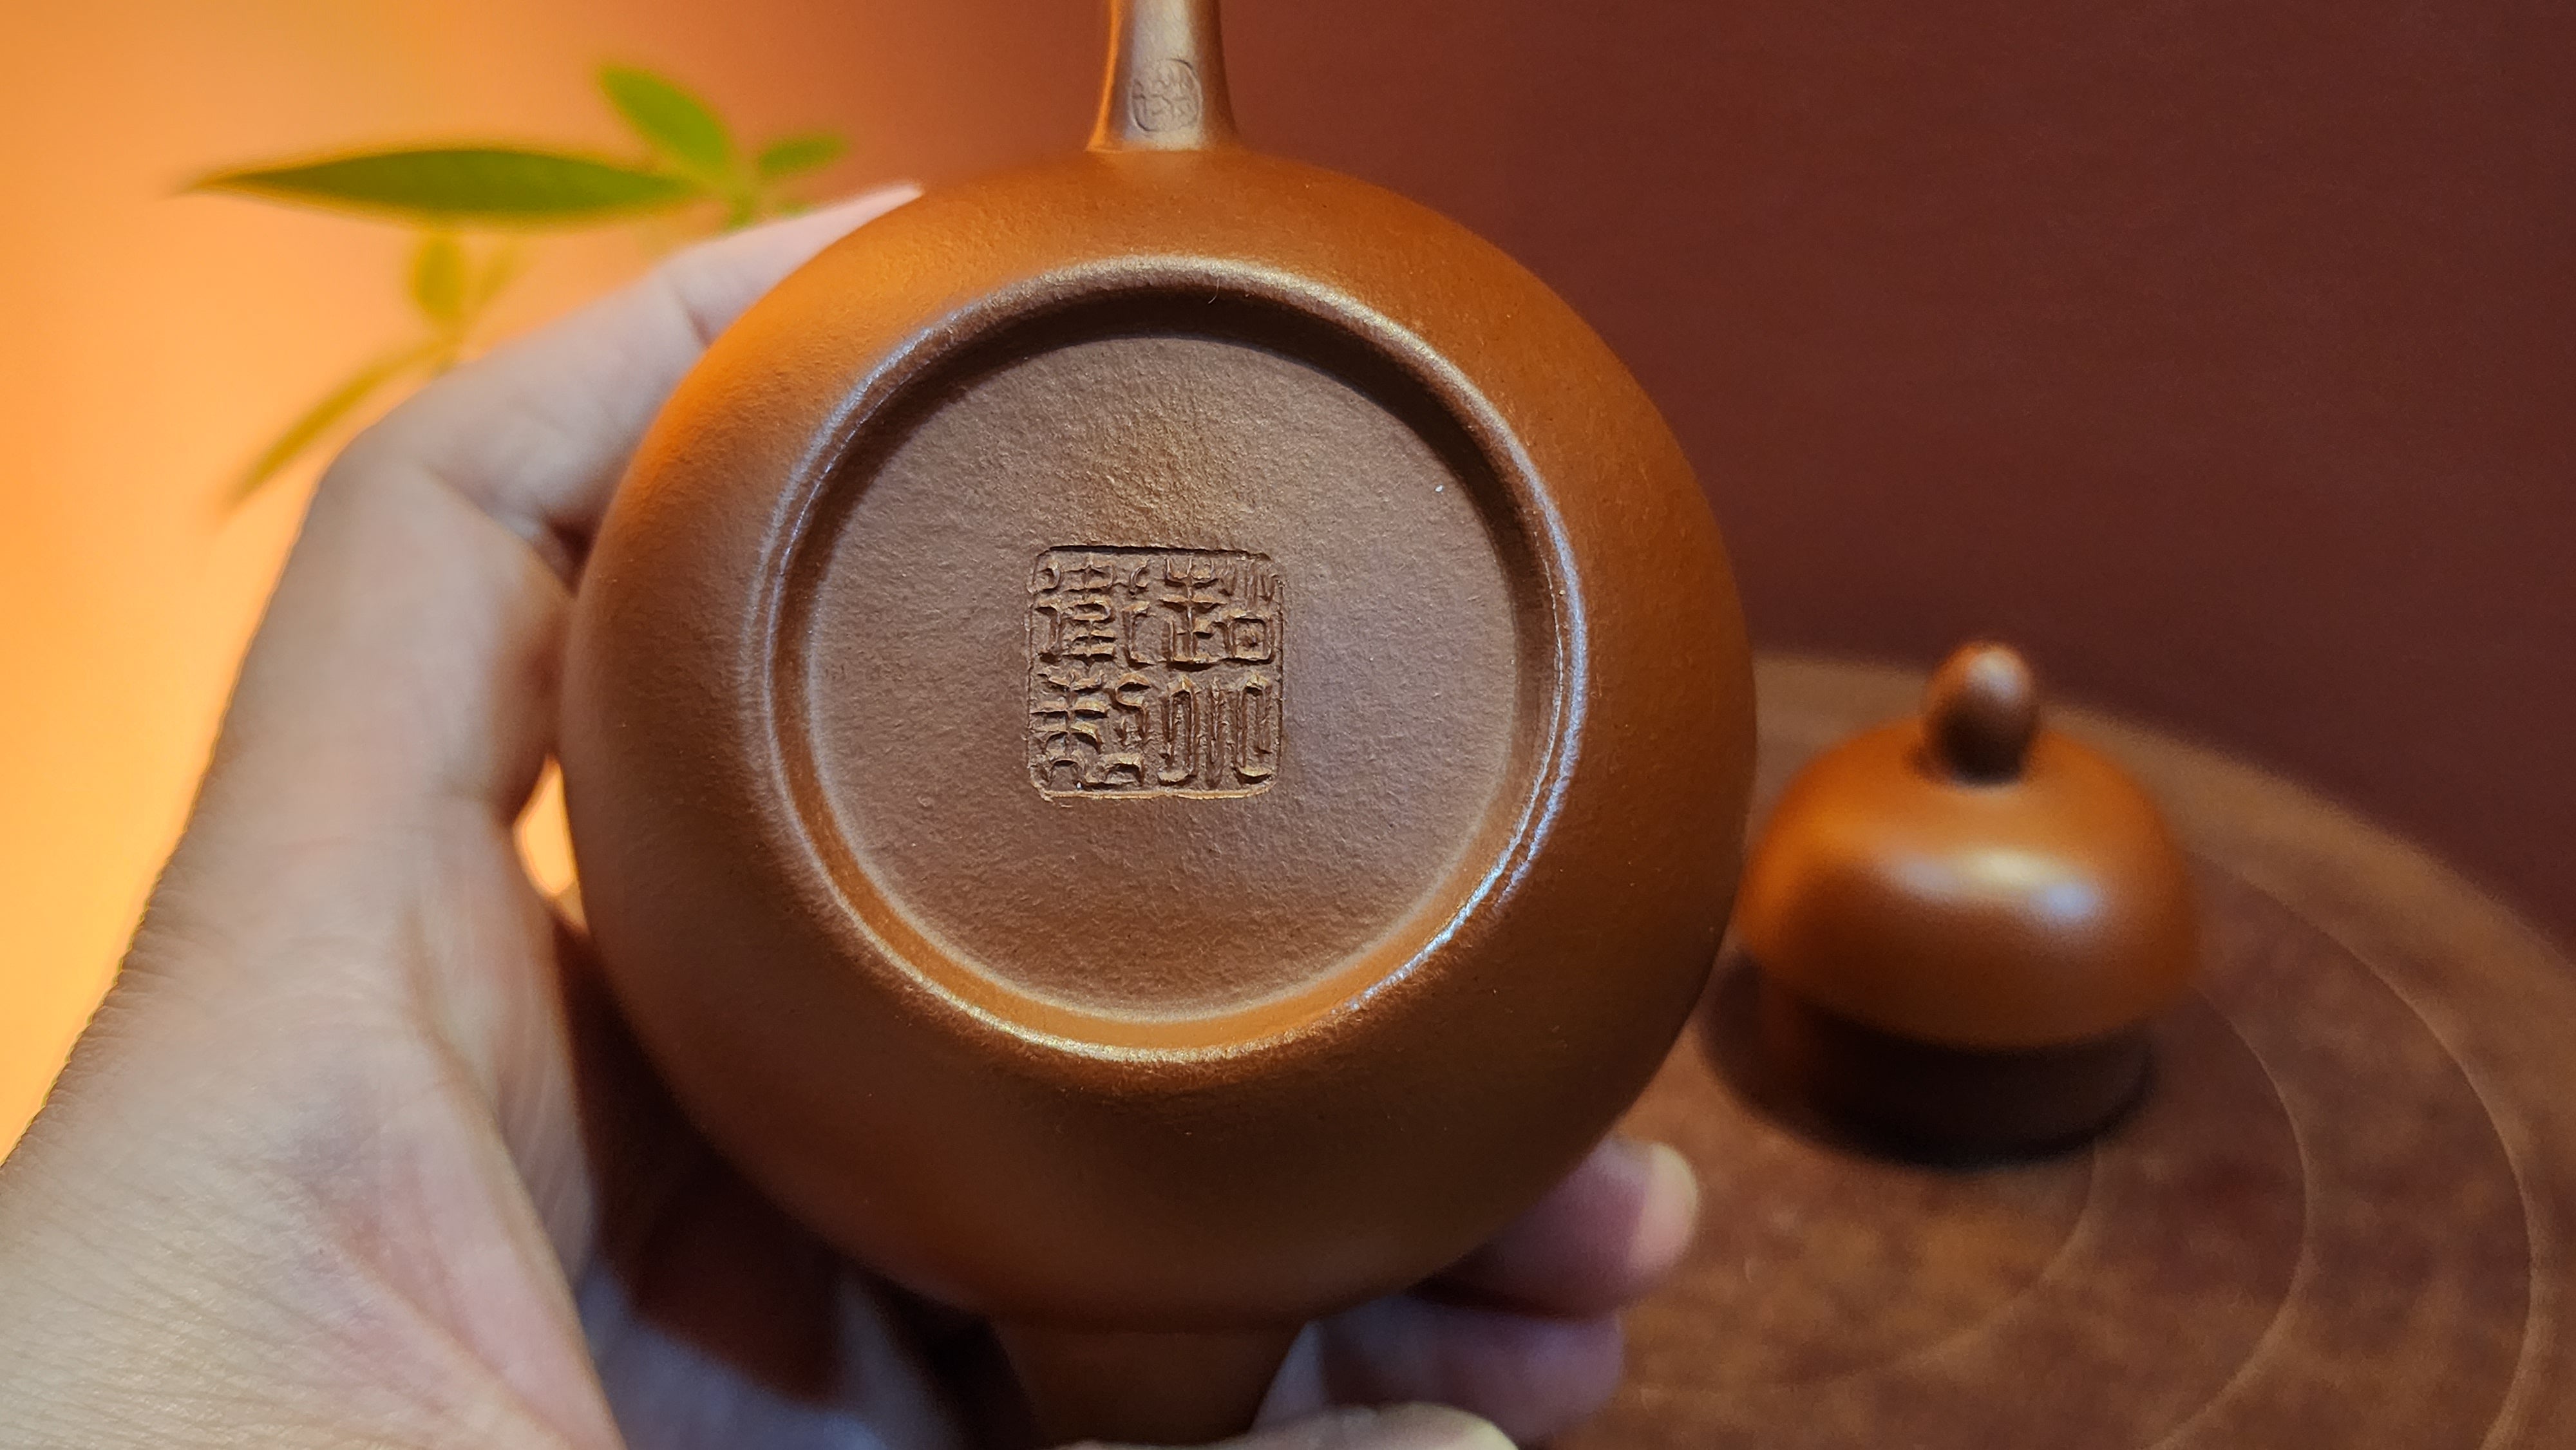 Si Ting 思亭, 140ml, XiaoMeiYao ZhuNi 小煤窑朱泥, by our collaborative Craftsman Zhao Xiao Wei 赵小卫。